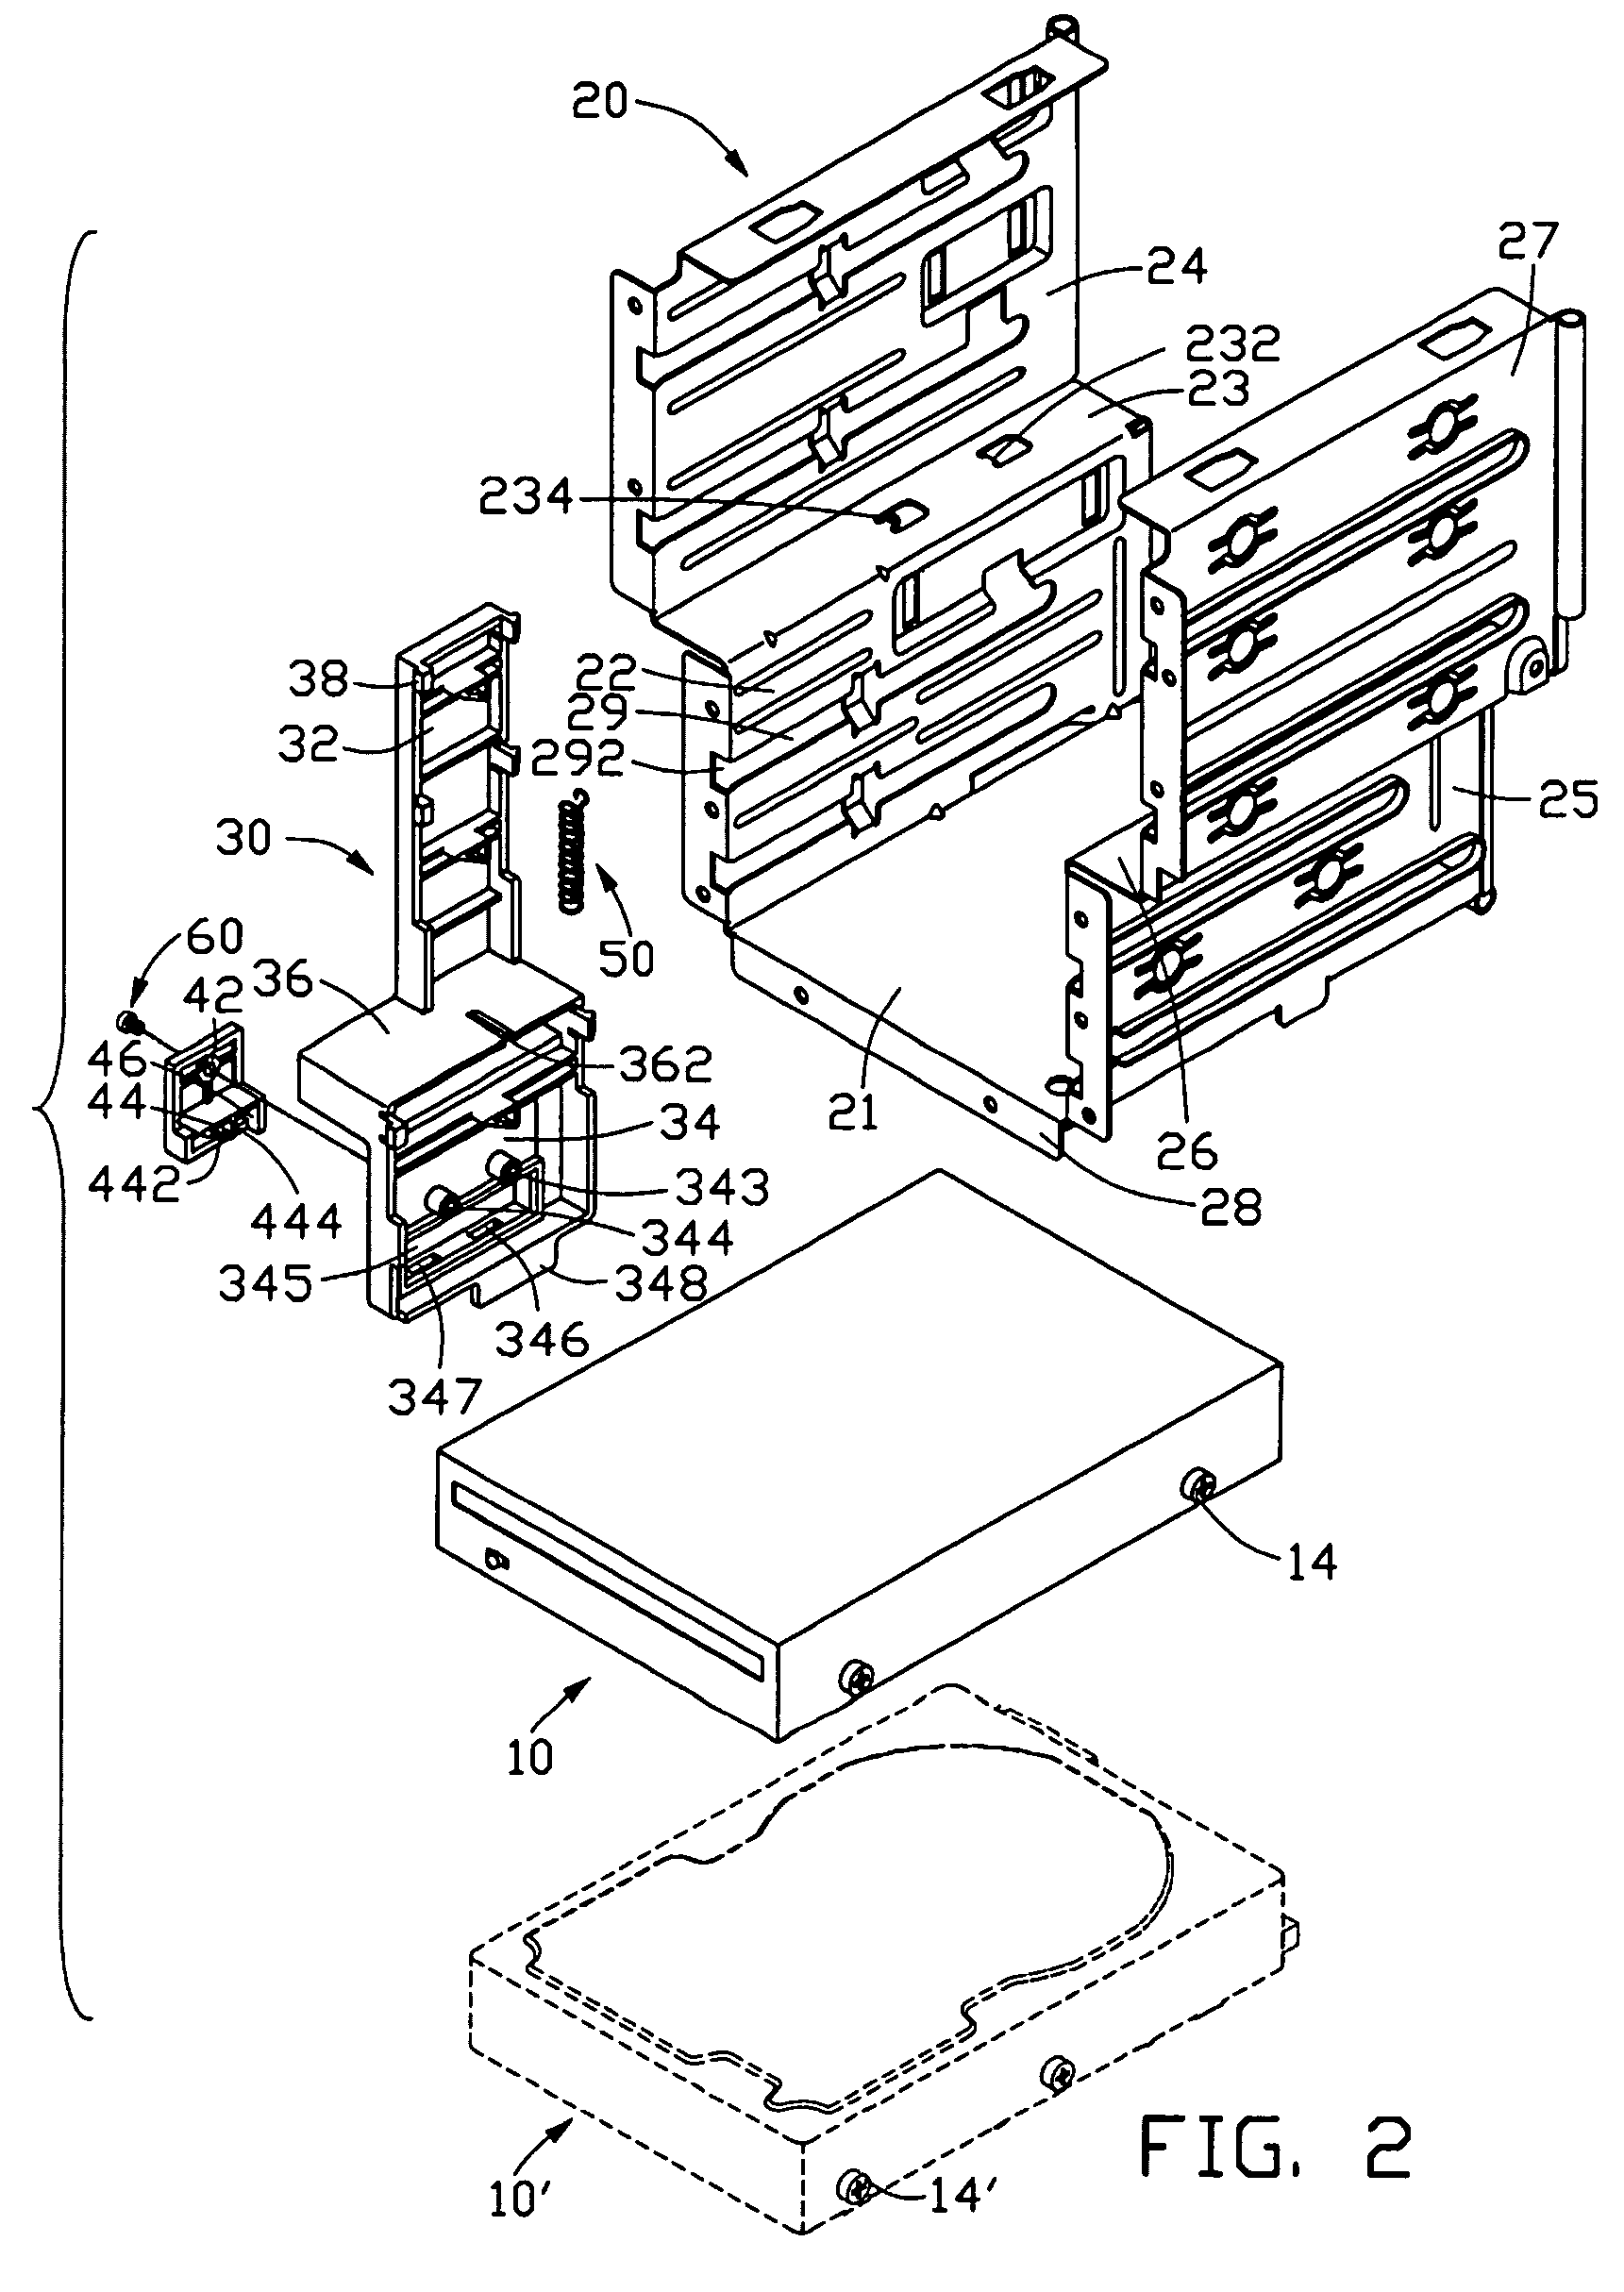 Mounting apparatus for data storage devices